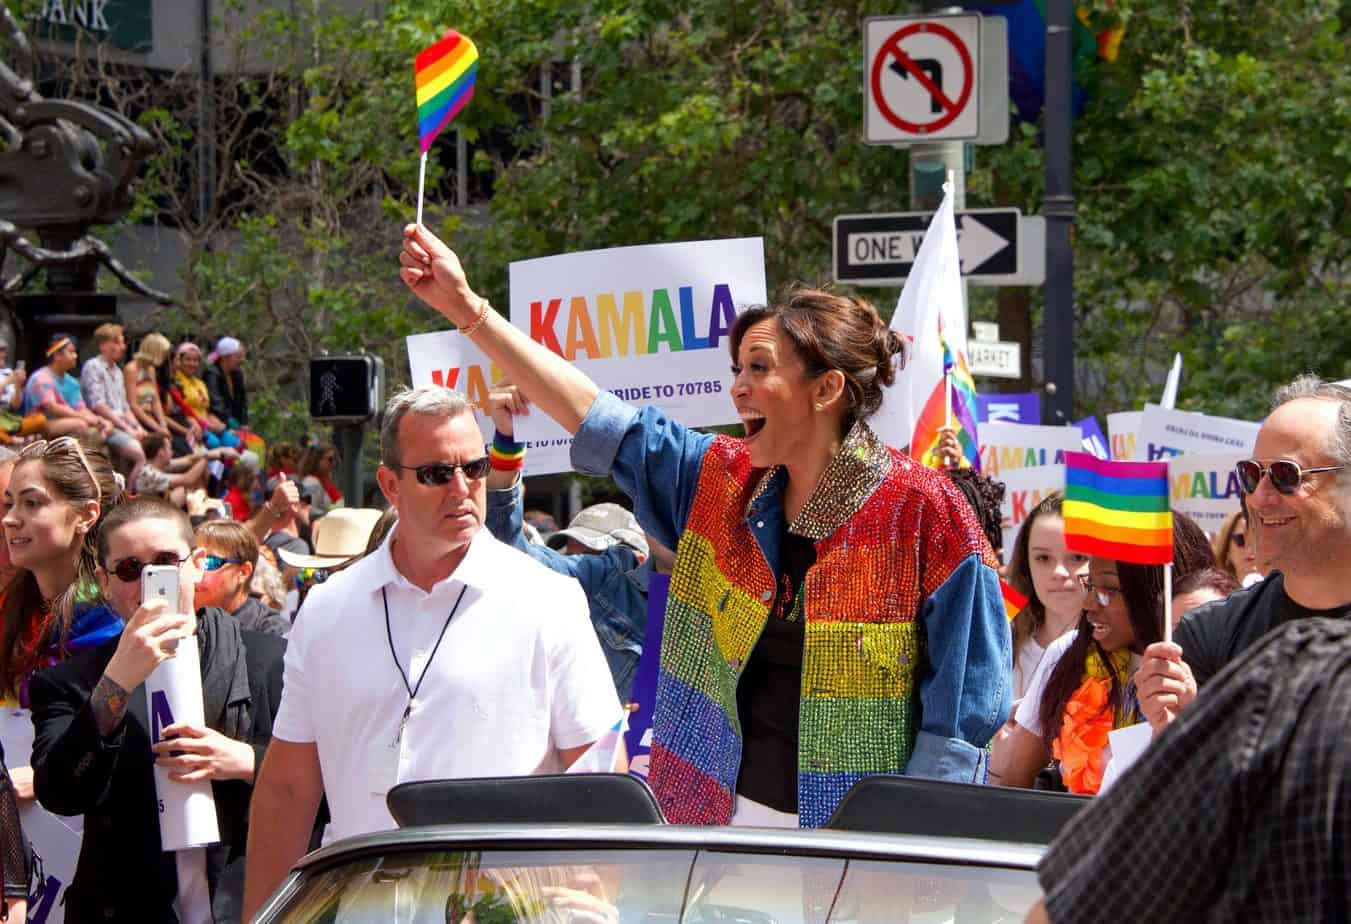 Kamala Harris is a favorite of LGBT and Pro-Choice voters. How will this affect the 2020 election?